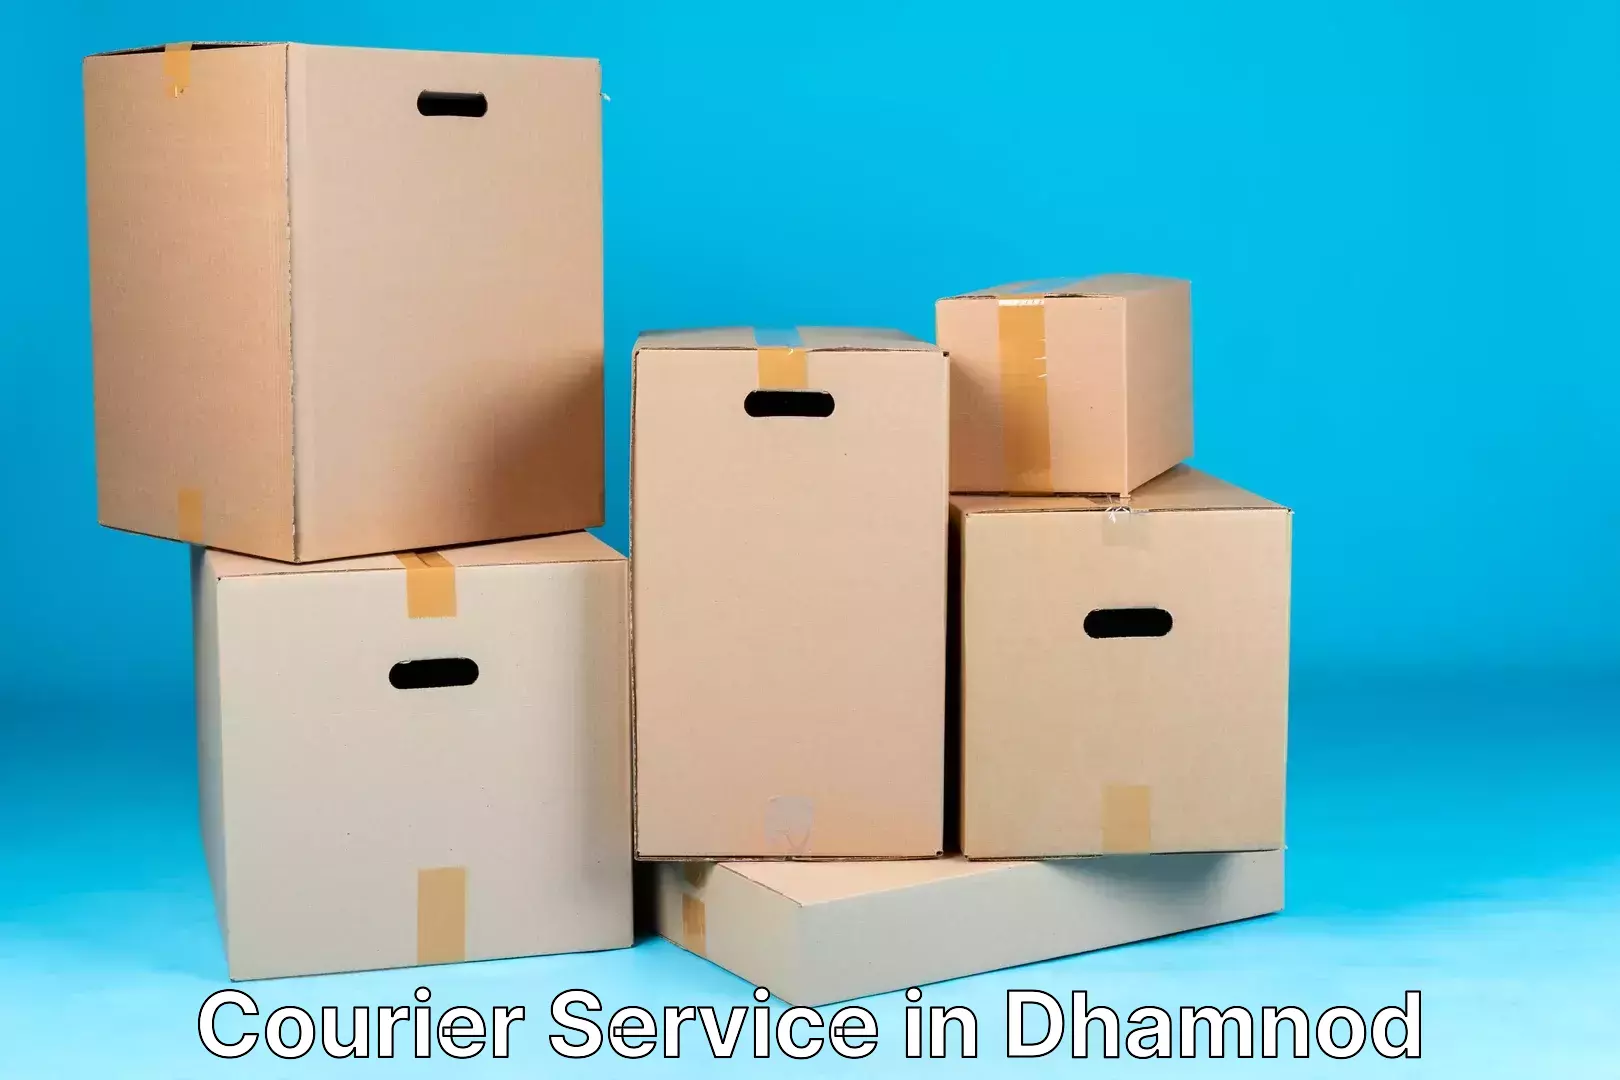 Comprehensive parcel tracking in Dhamnod